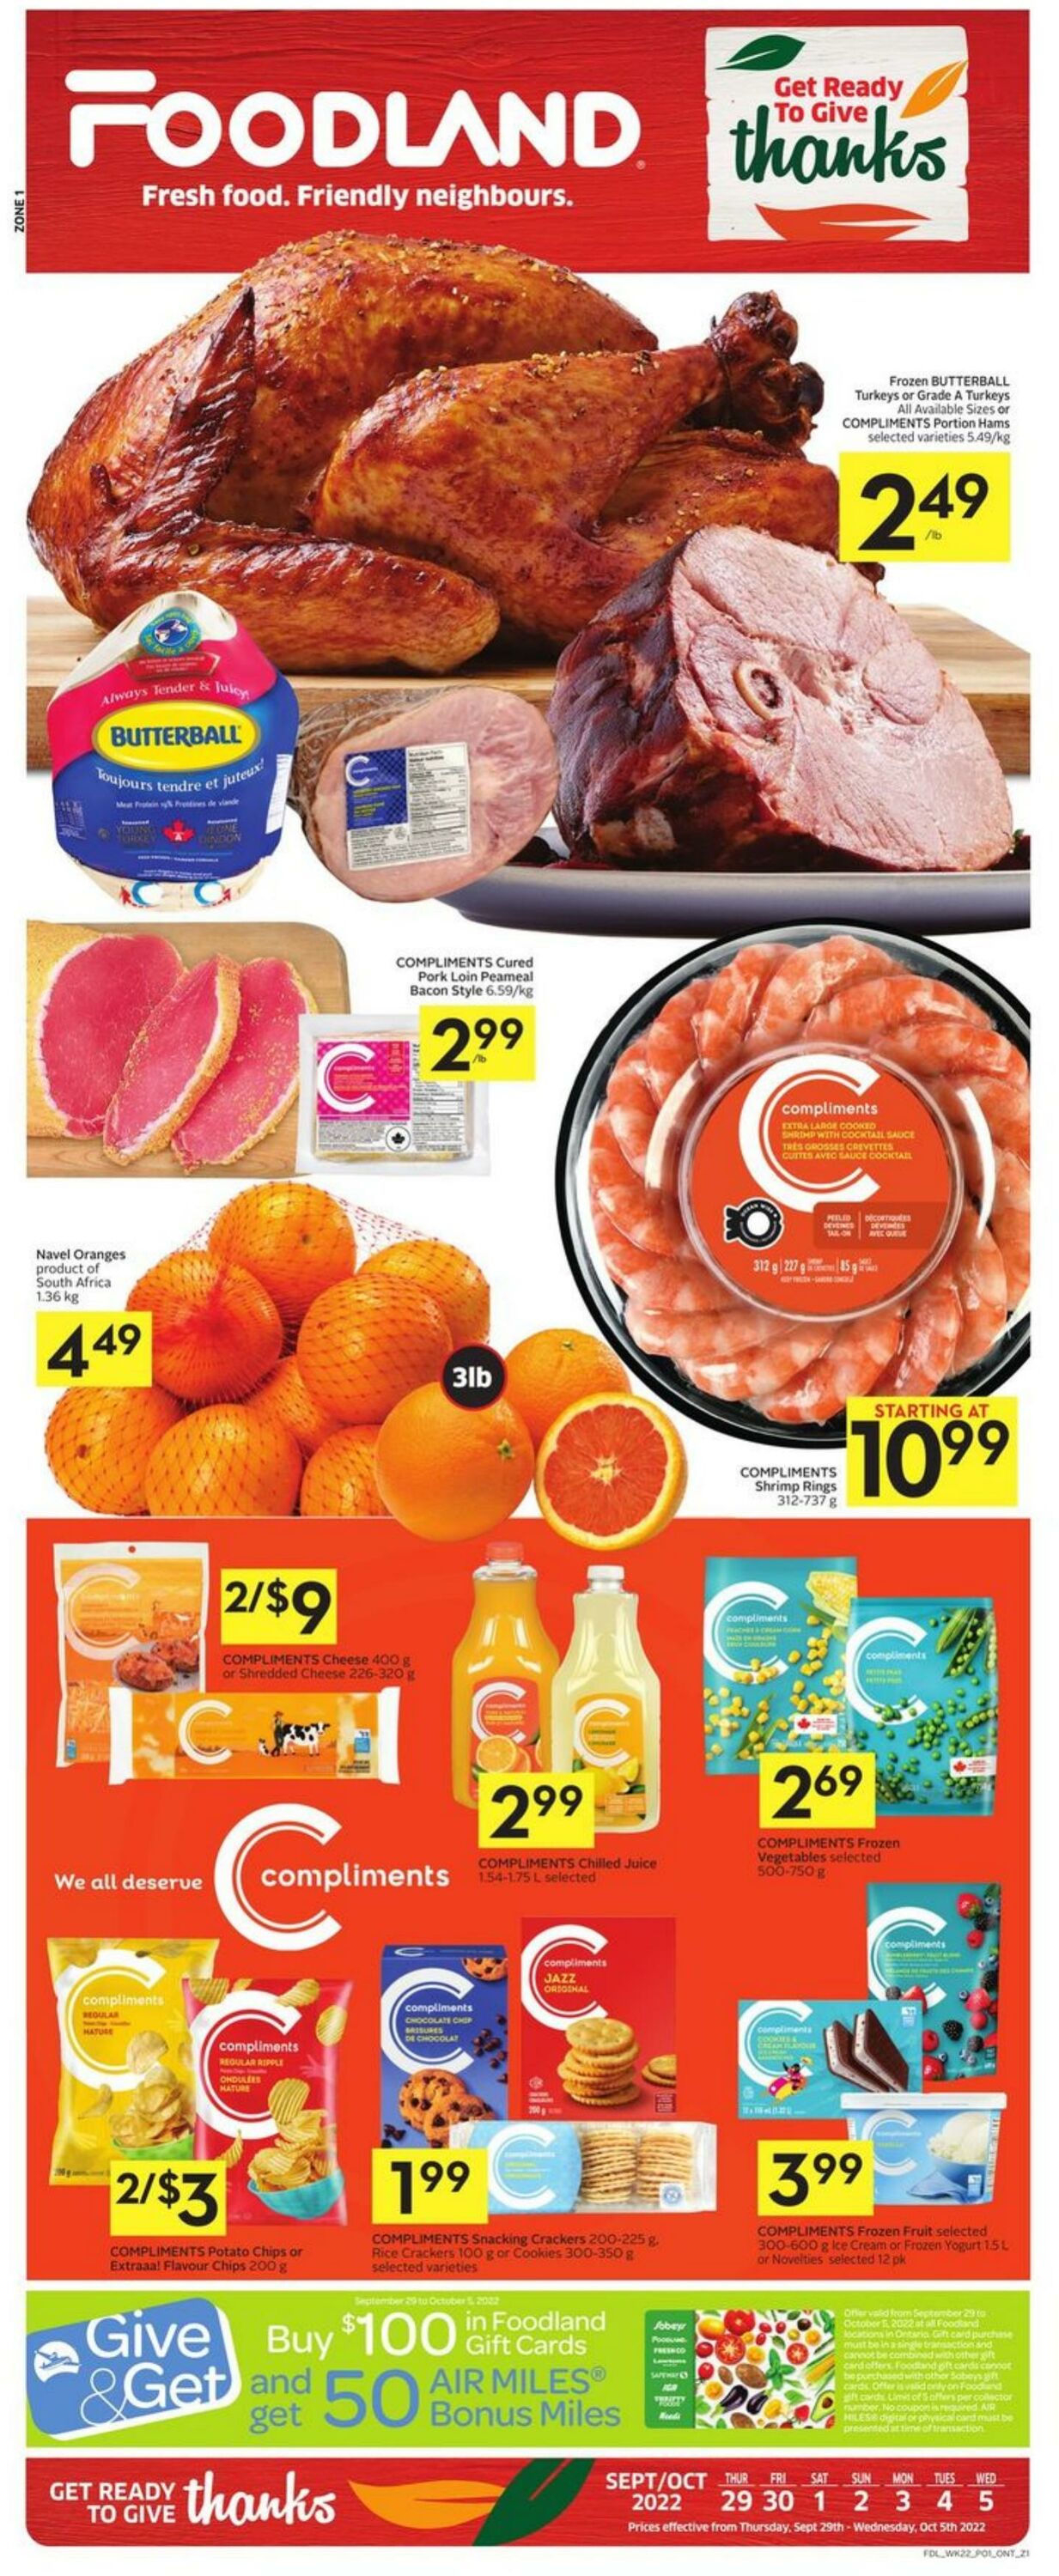 Foodland Promotional Flyer Thanksgiving Day Valid from 29.09 to 05.